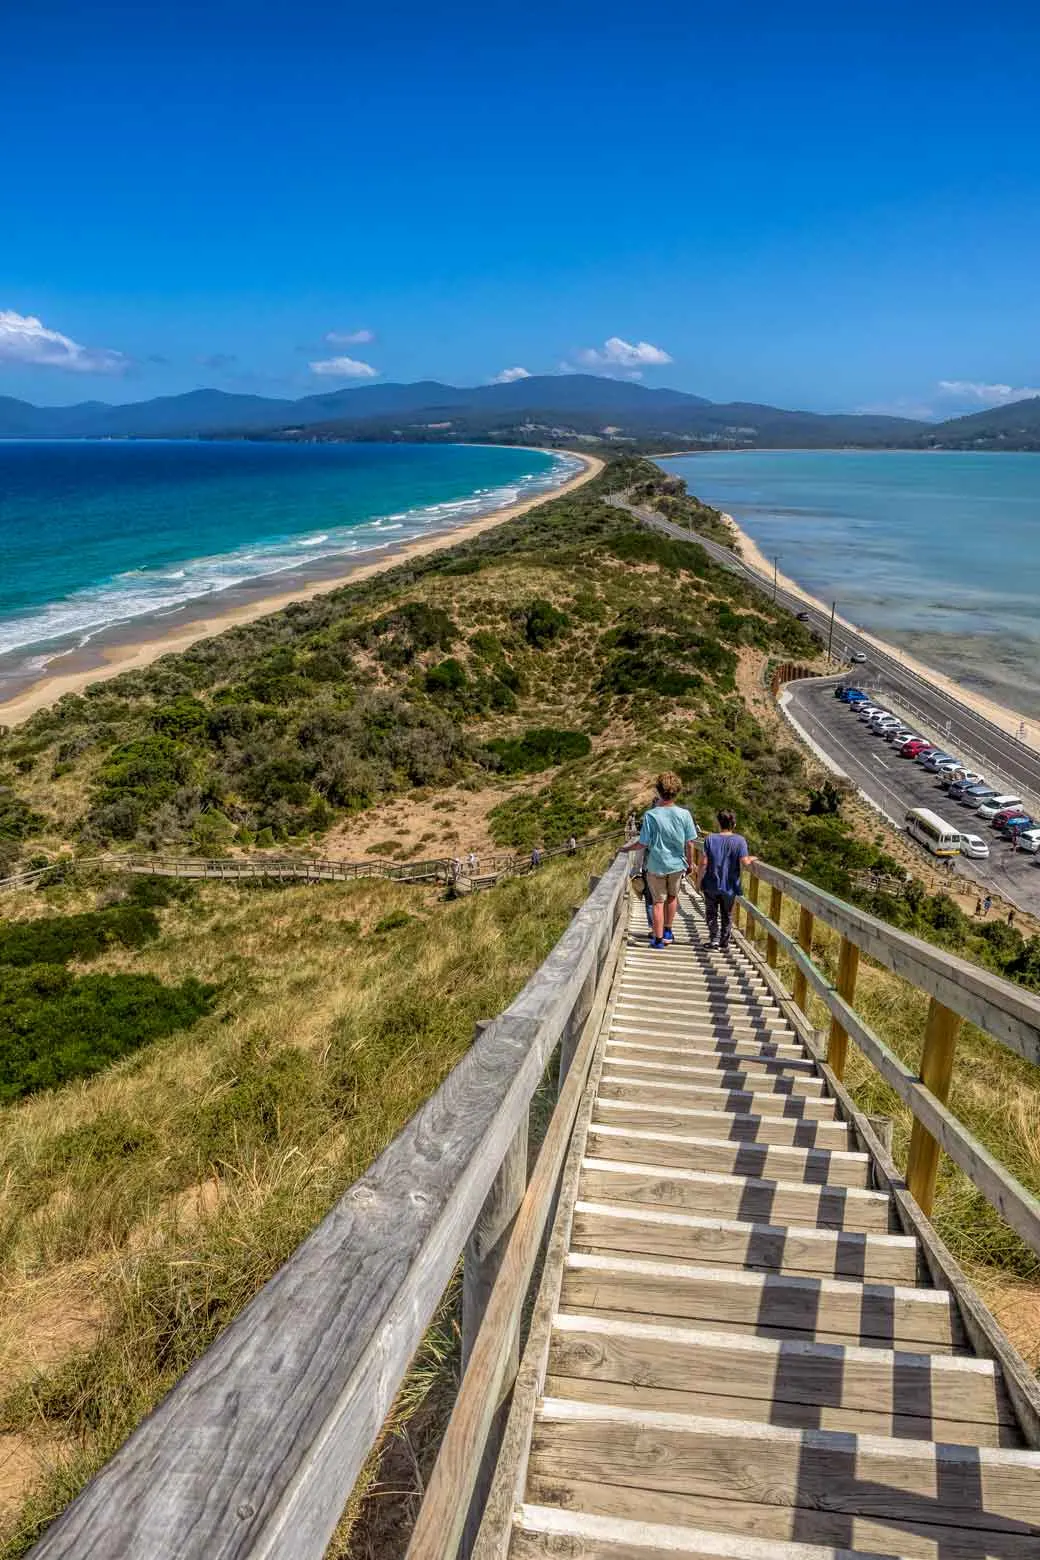 From the lookout down the narrow peninsula on Bruny Island